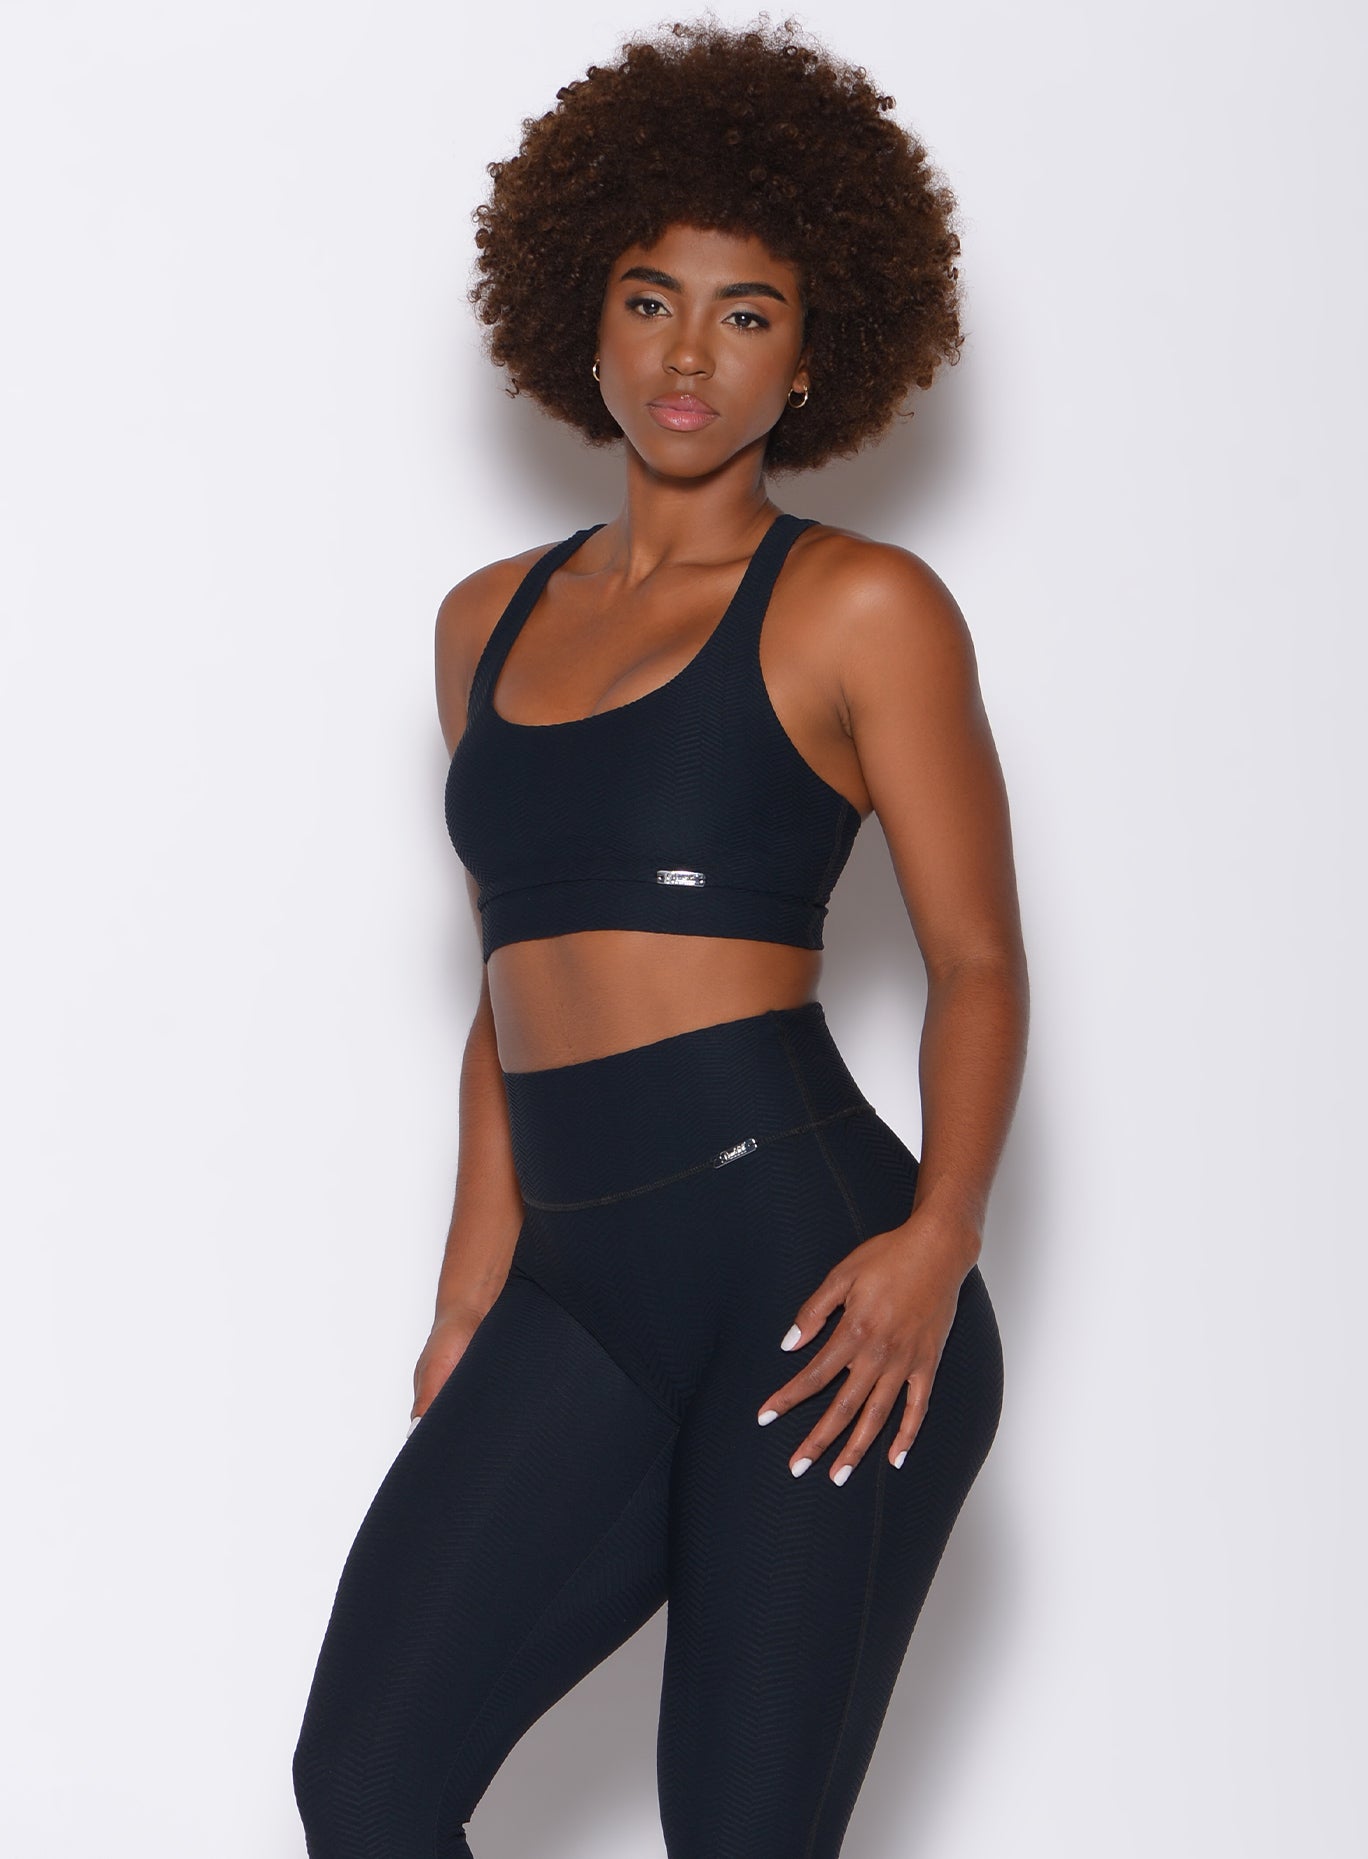 Front profile view of a model in our chevron sports bra in jet black color and a matching leggings